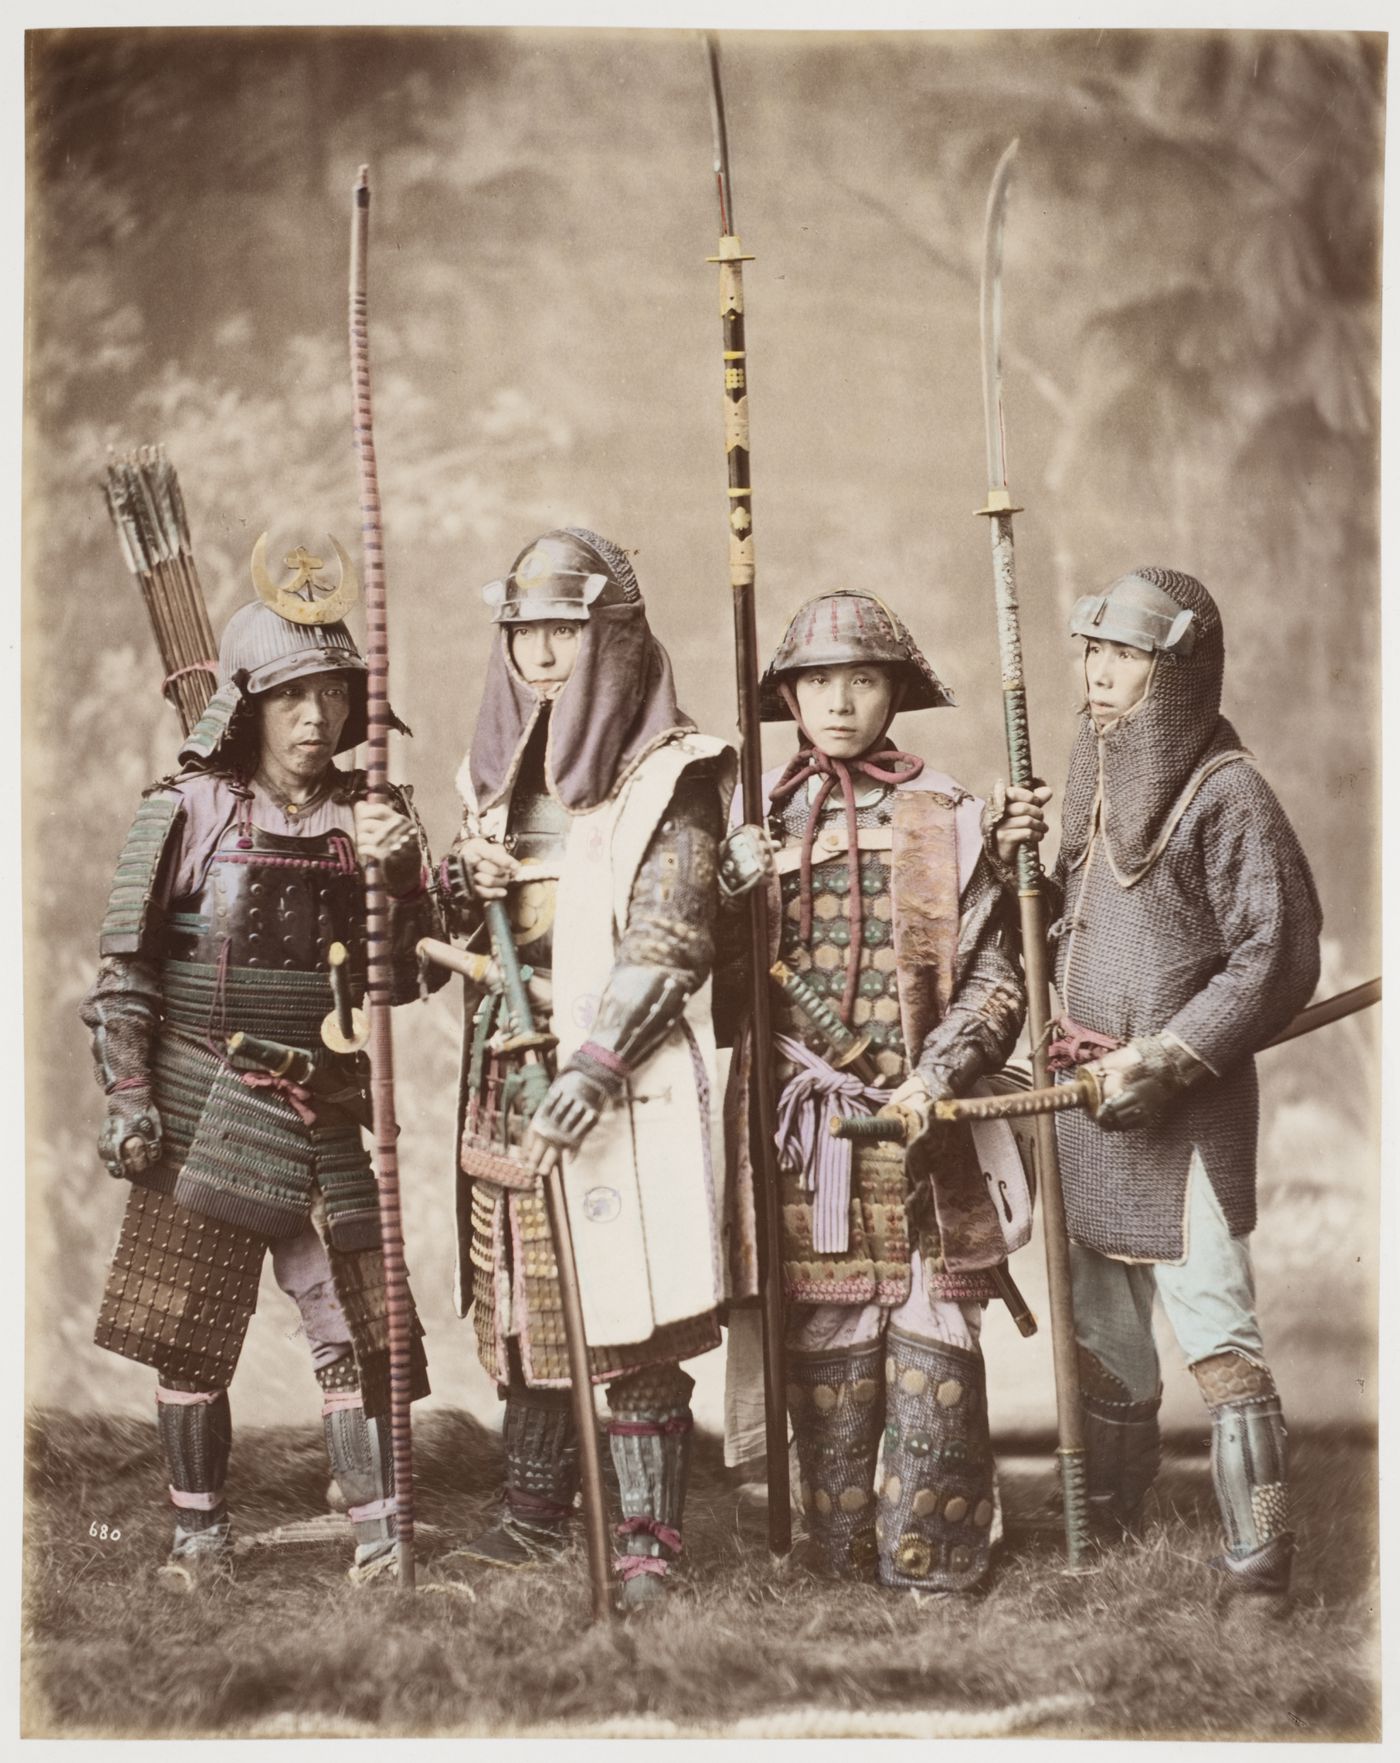 Group portrait of four samurai wearing armour and holding various weapons, Japan